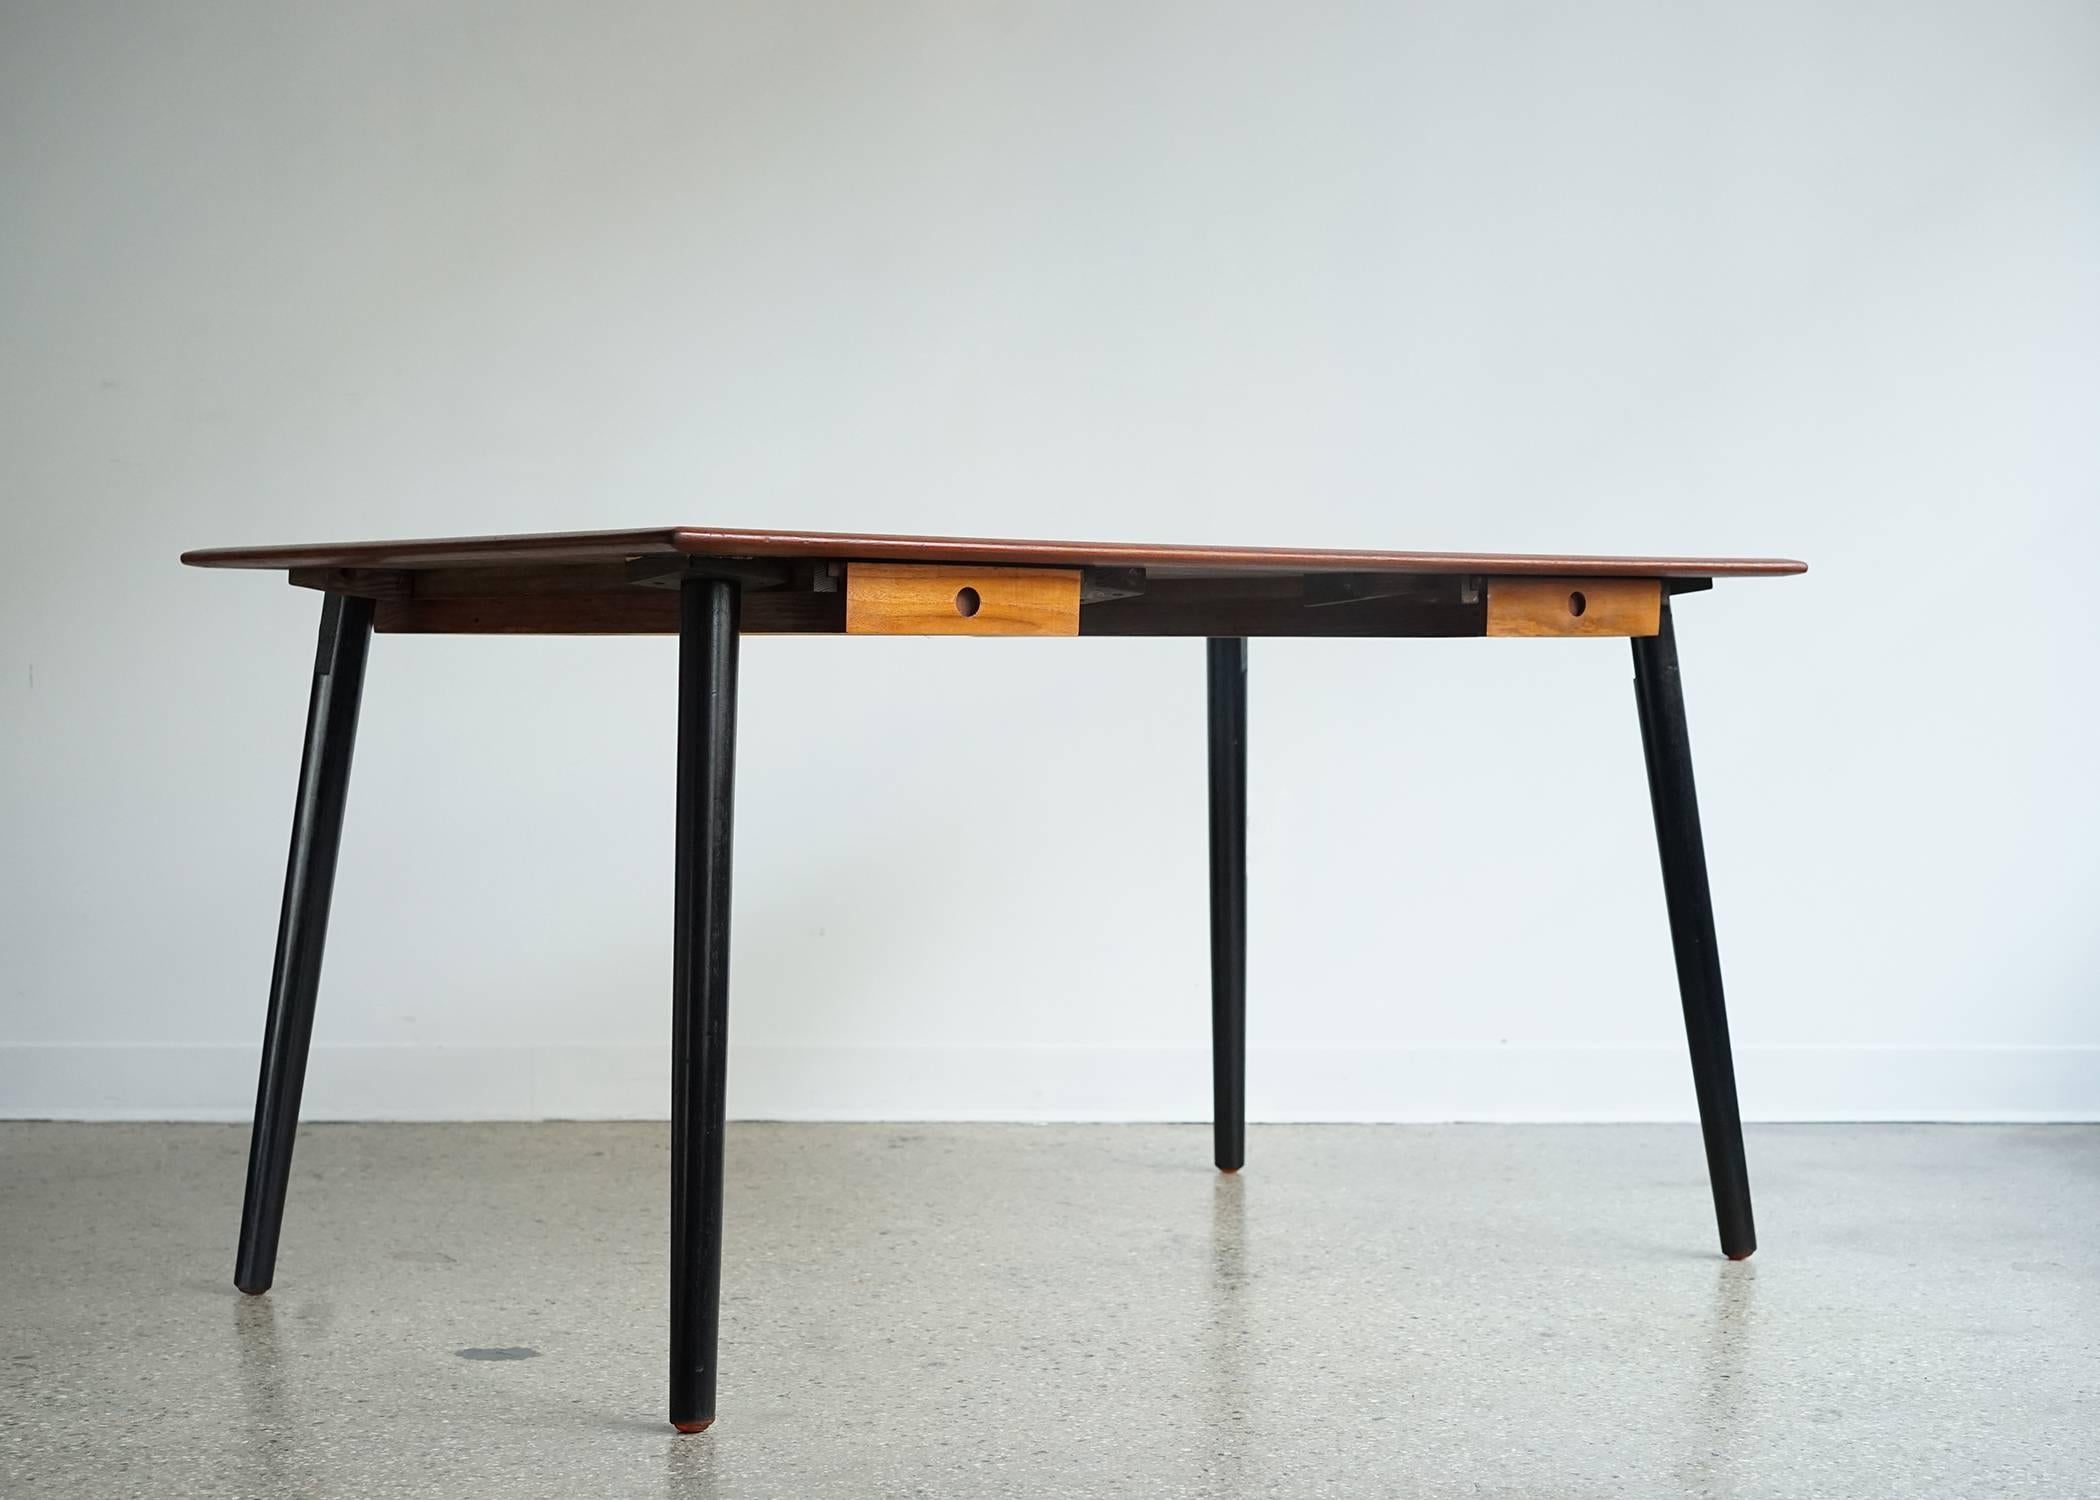 Teak top with drawers on either side elevated on ebonized tapered legs. With the legs set at the four corners, it functions as a partners desk or a dining table in the middle of a room. Two legs can be repositioned between the drawers for a more